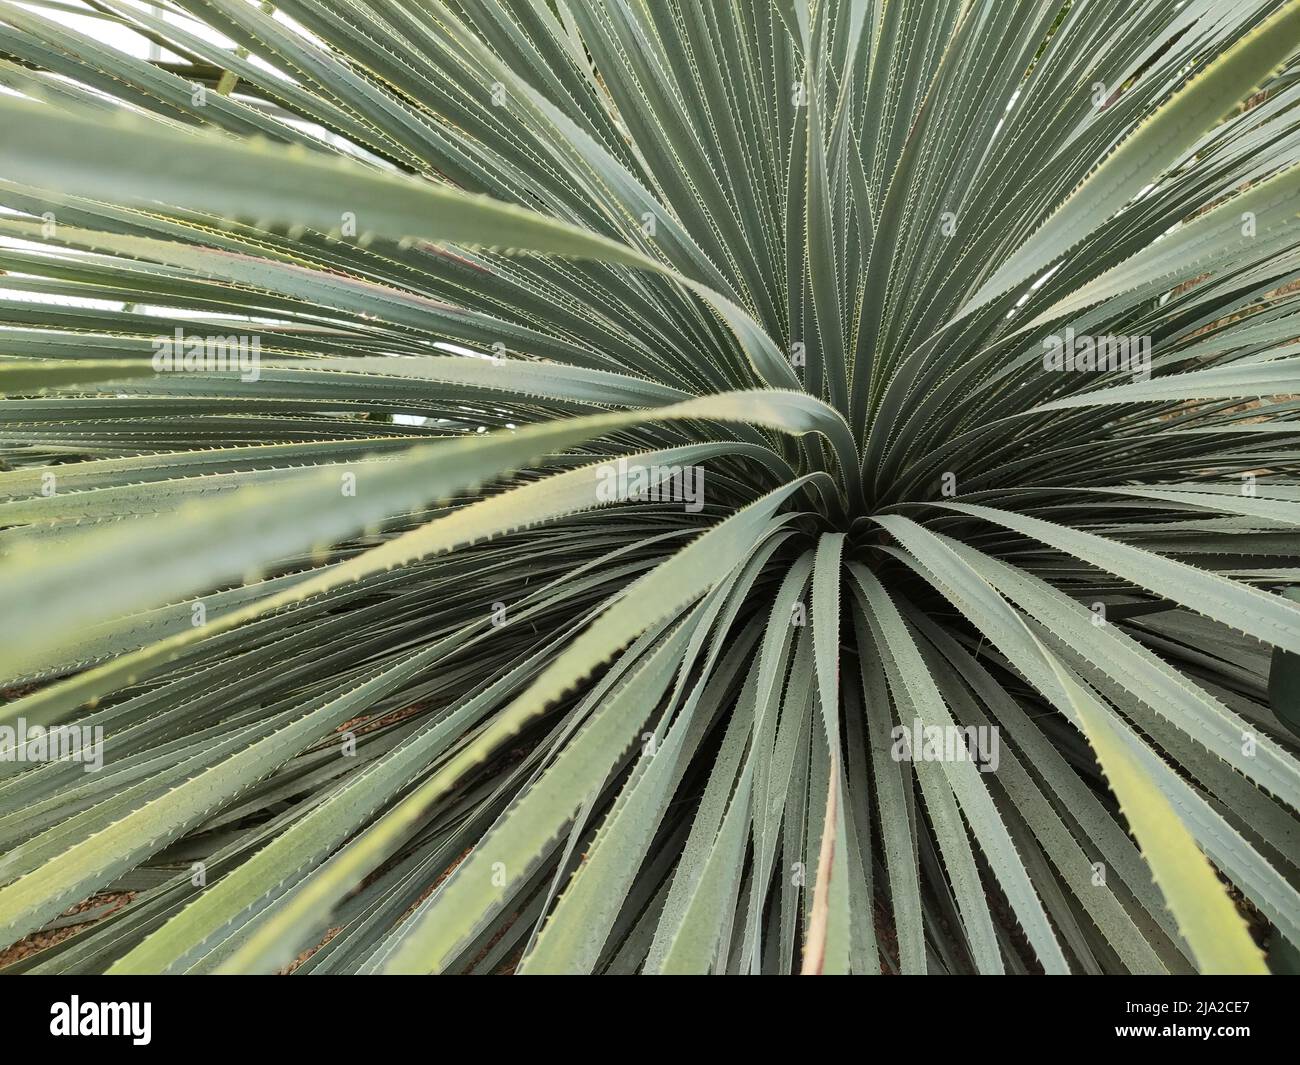 Dasylirion wheeleri. Desert Mexican plant with spiked long leaves. Stock Photo